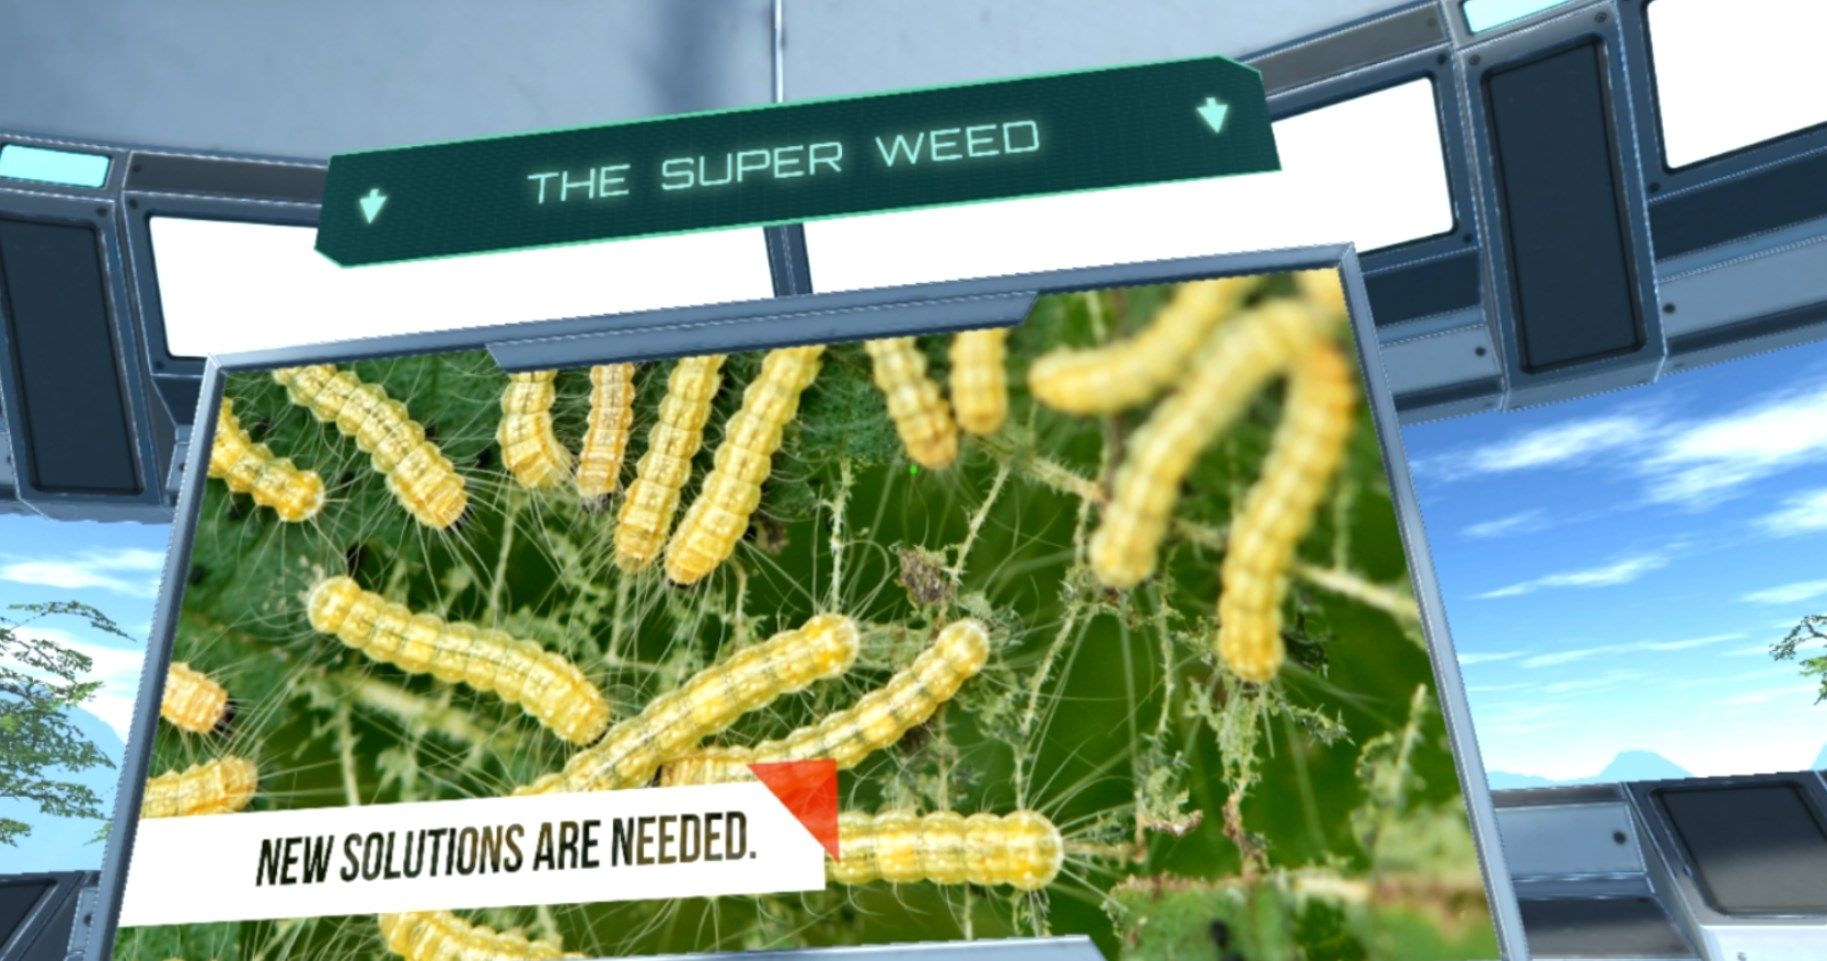 Sustainable Farming and the Super Weed